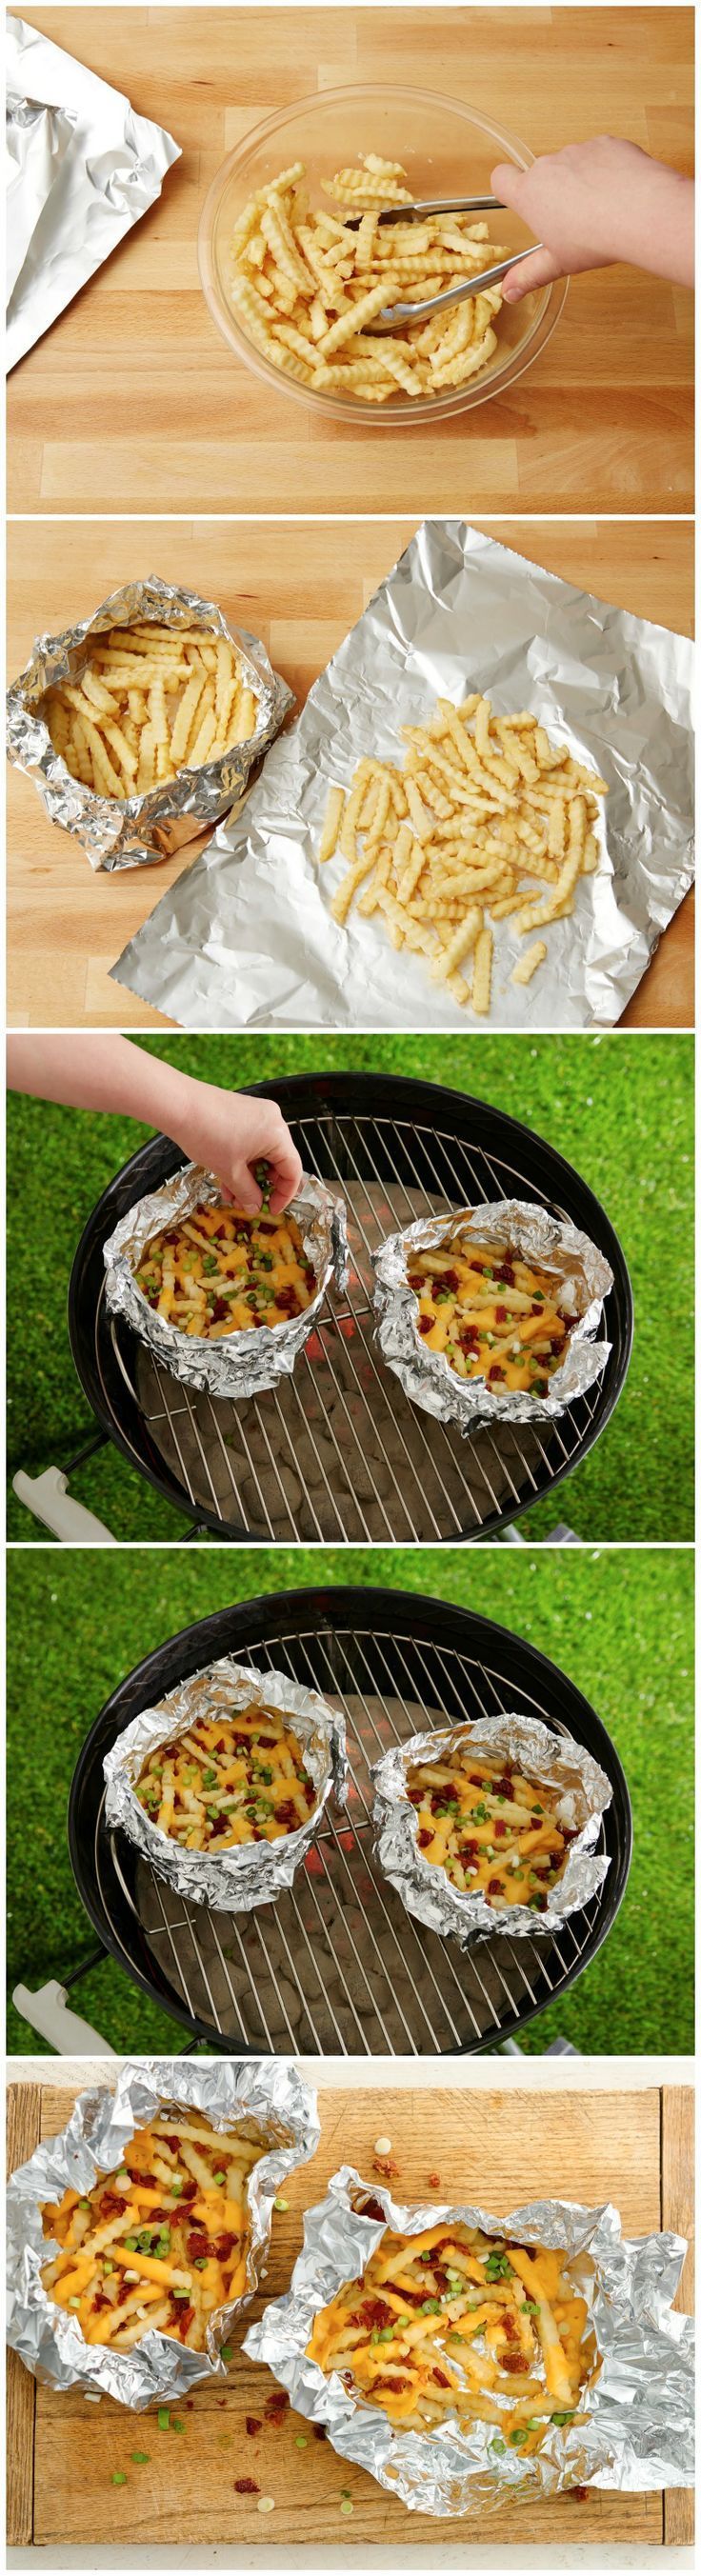 Grilled Foil-Pack Cheesy Fr